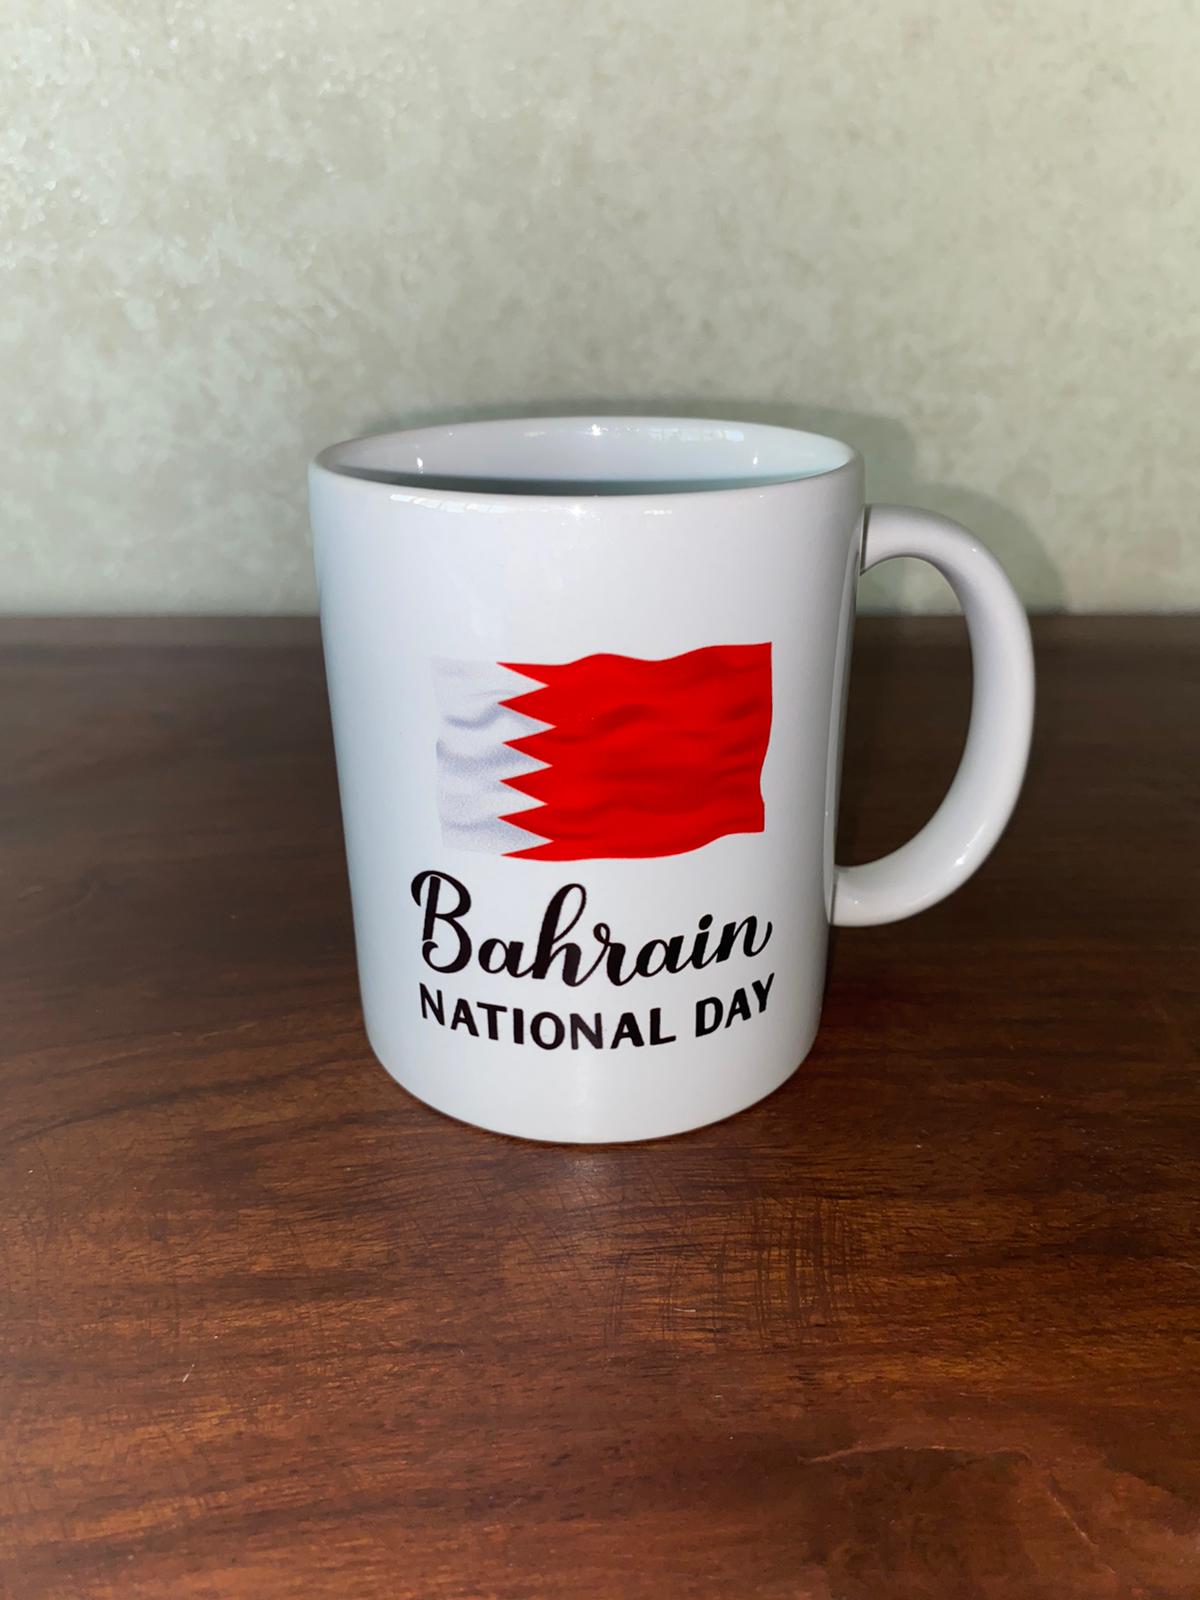 Cup Bahrain National Day | Coffee Cup | Halabh.com